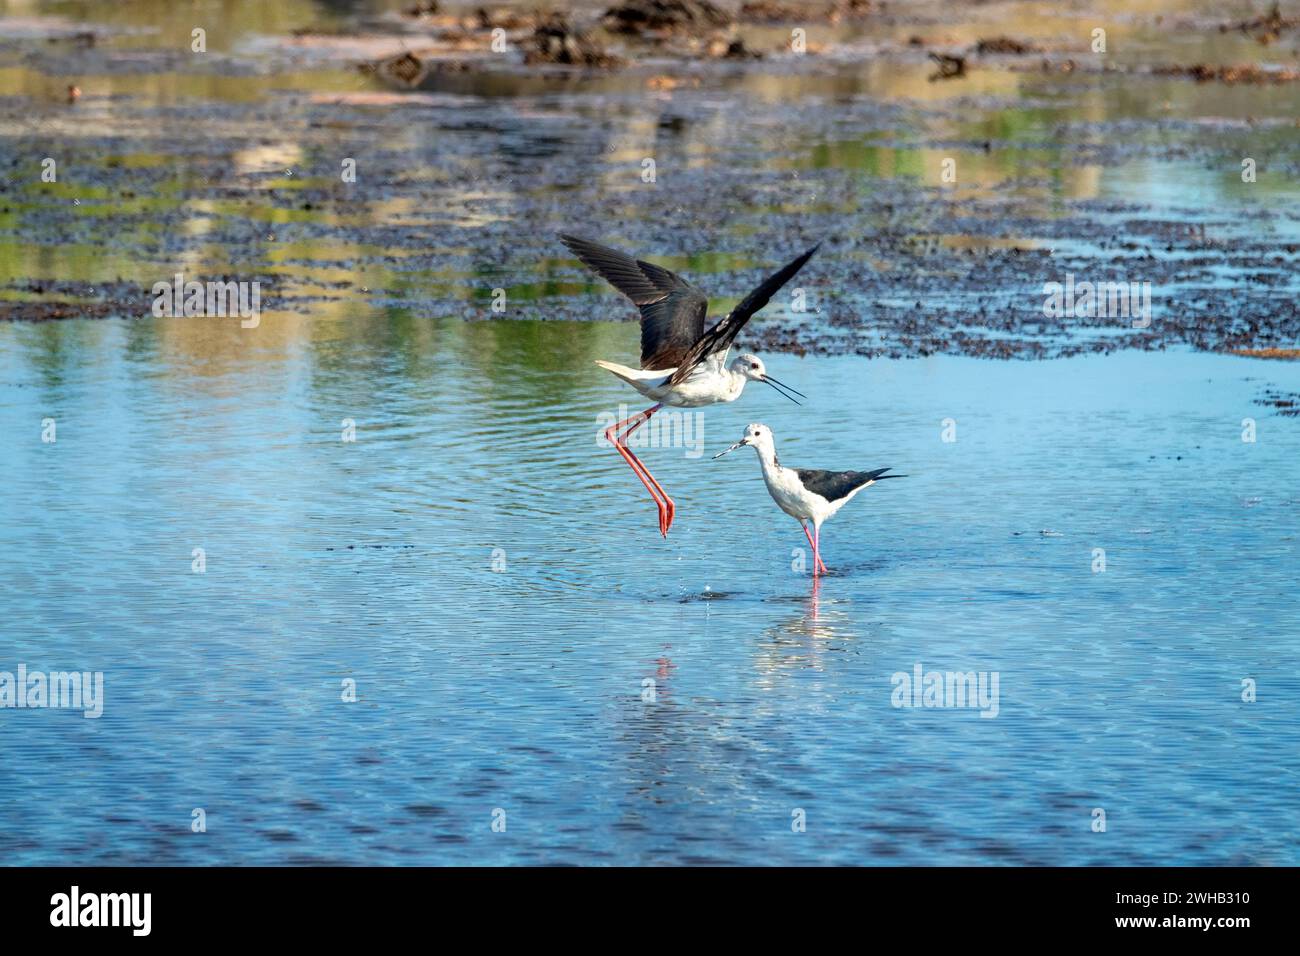 Black-winged stilts (Himantopus himantopus) as inhabitants of heavily polluted water bodies (sewage fields, waste landfill deposit) within human settl Stock Photo